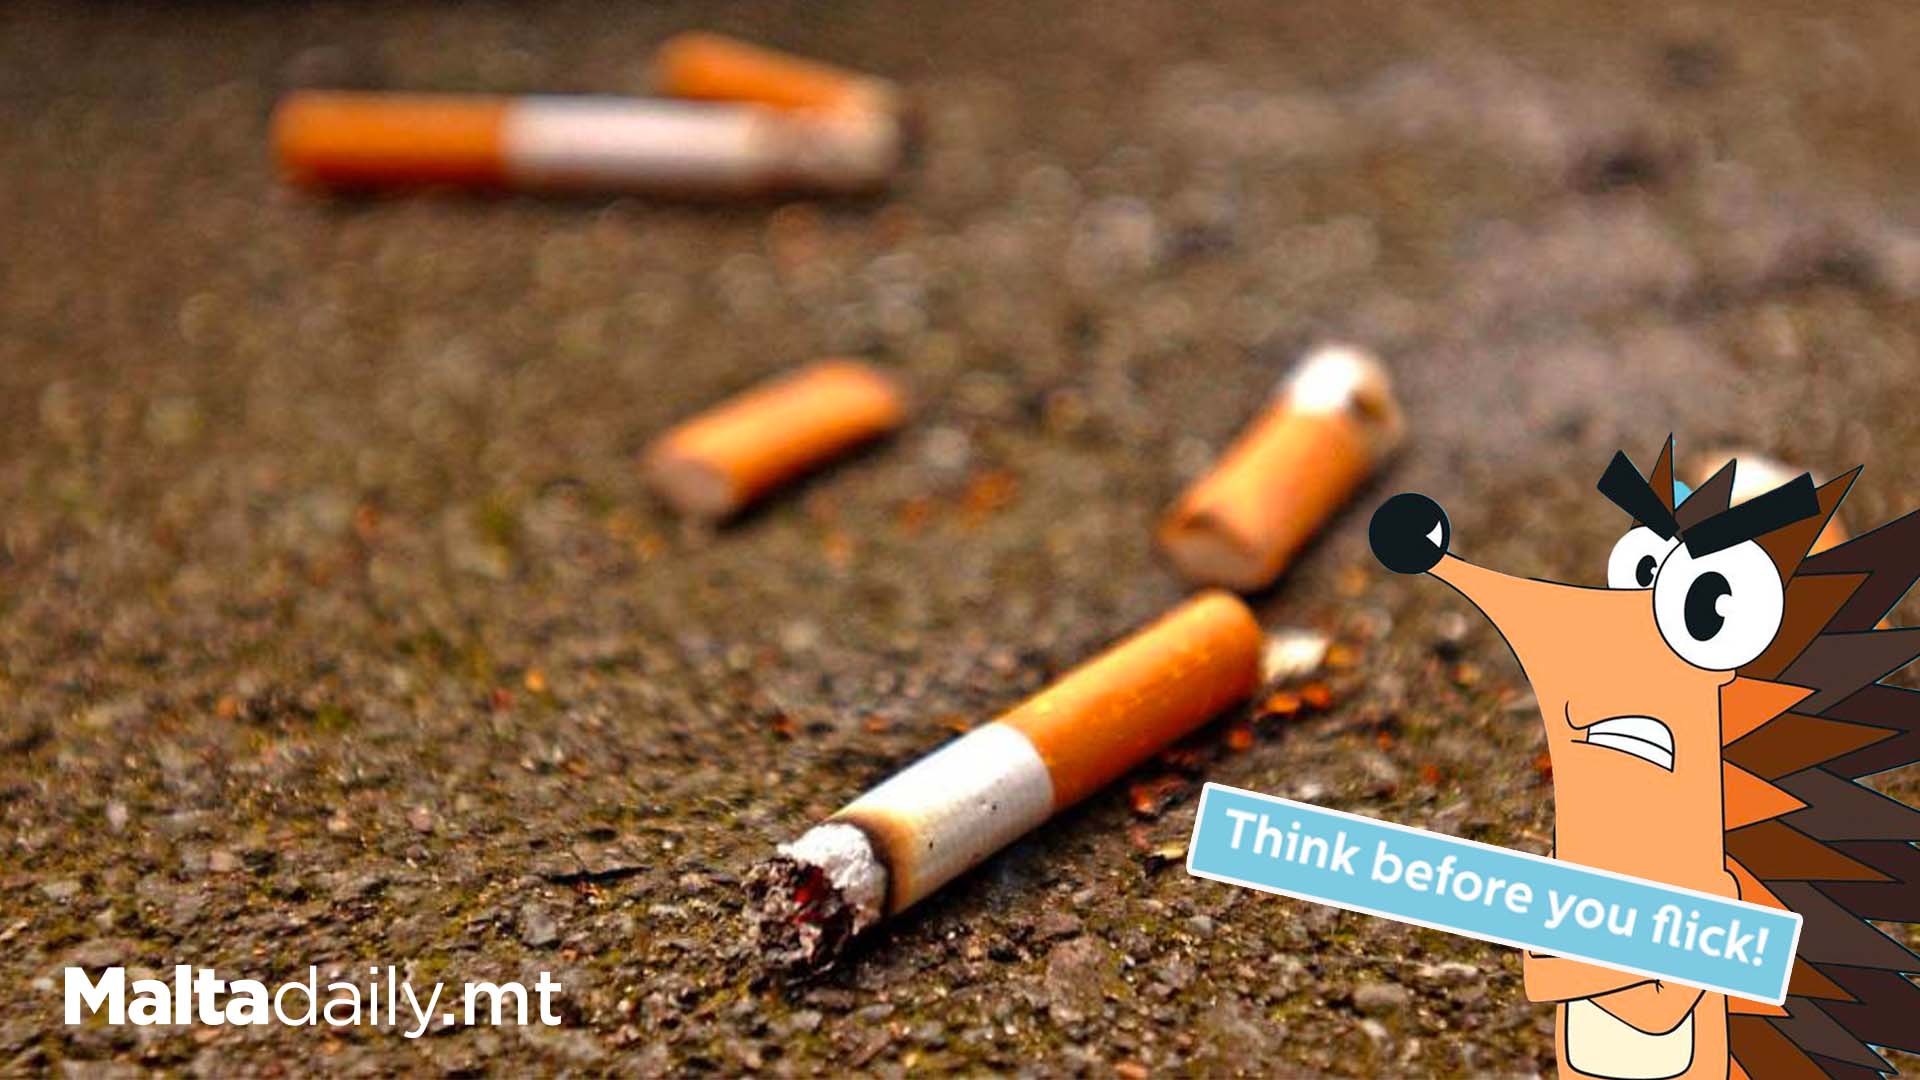 Cigarette Butts Are One Of the Most Littered Items Globally